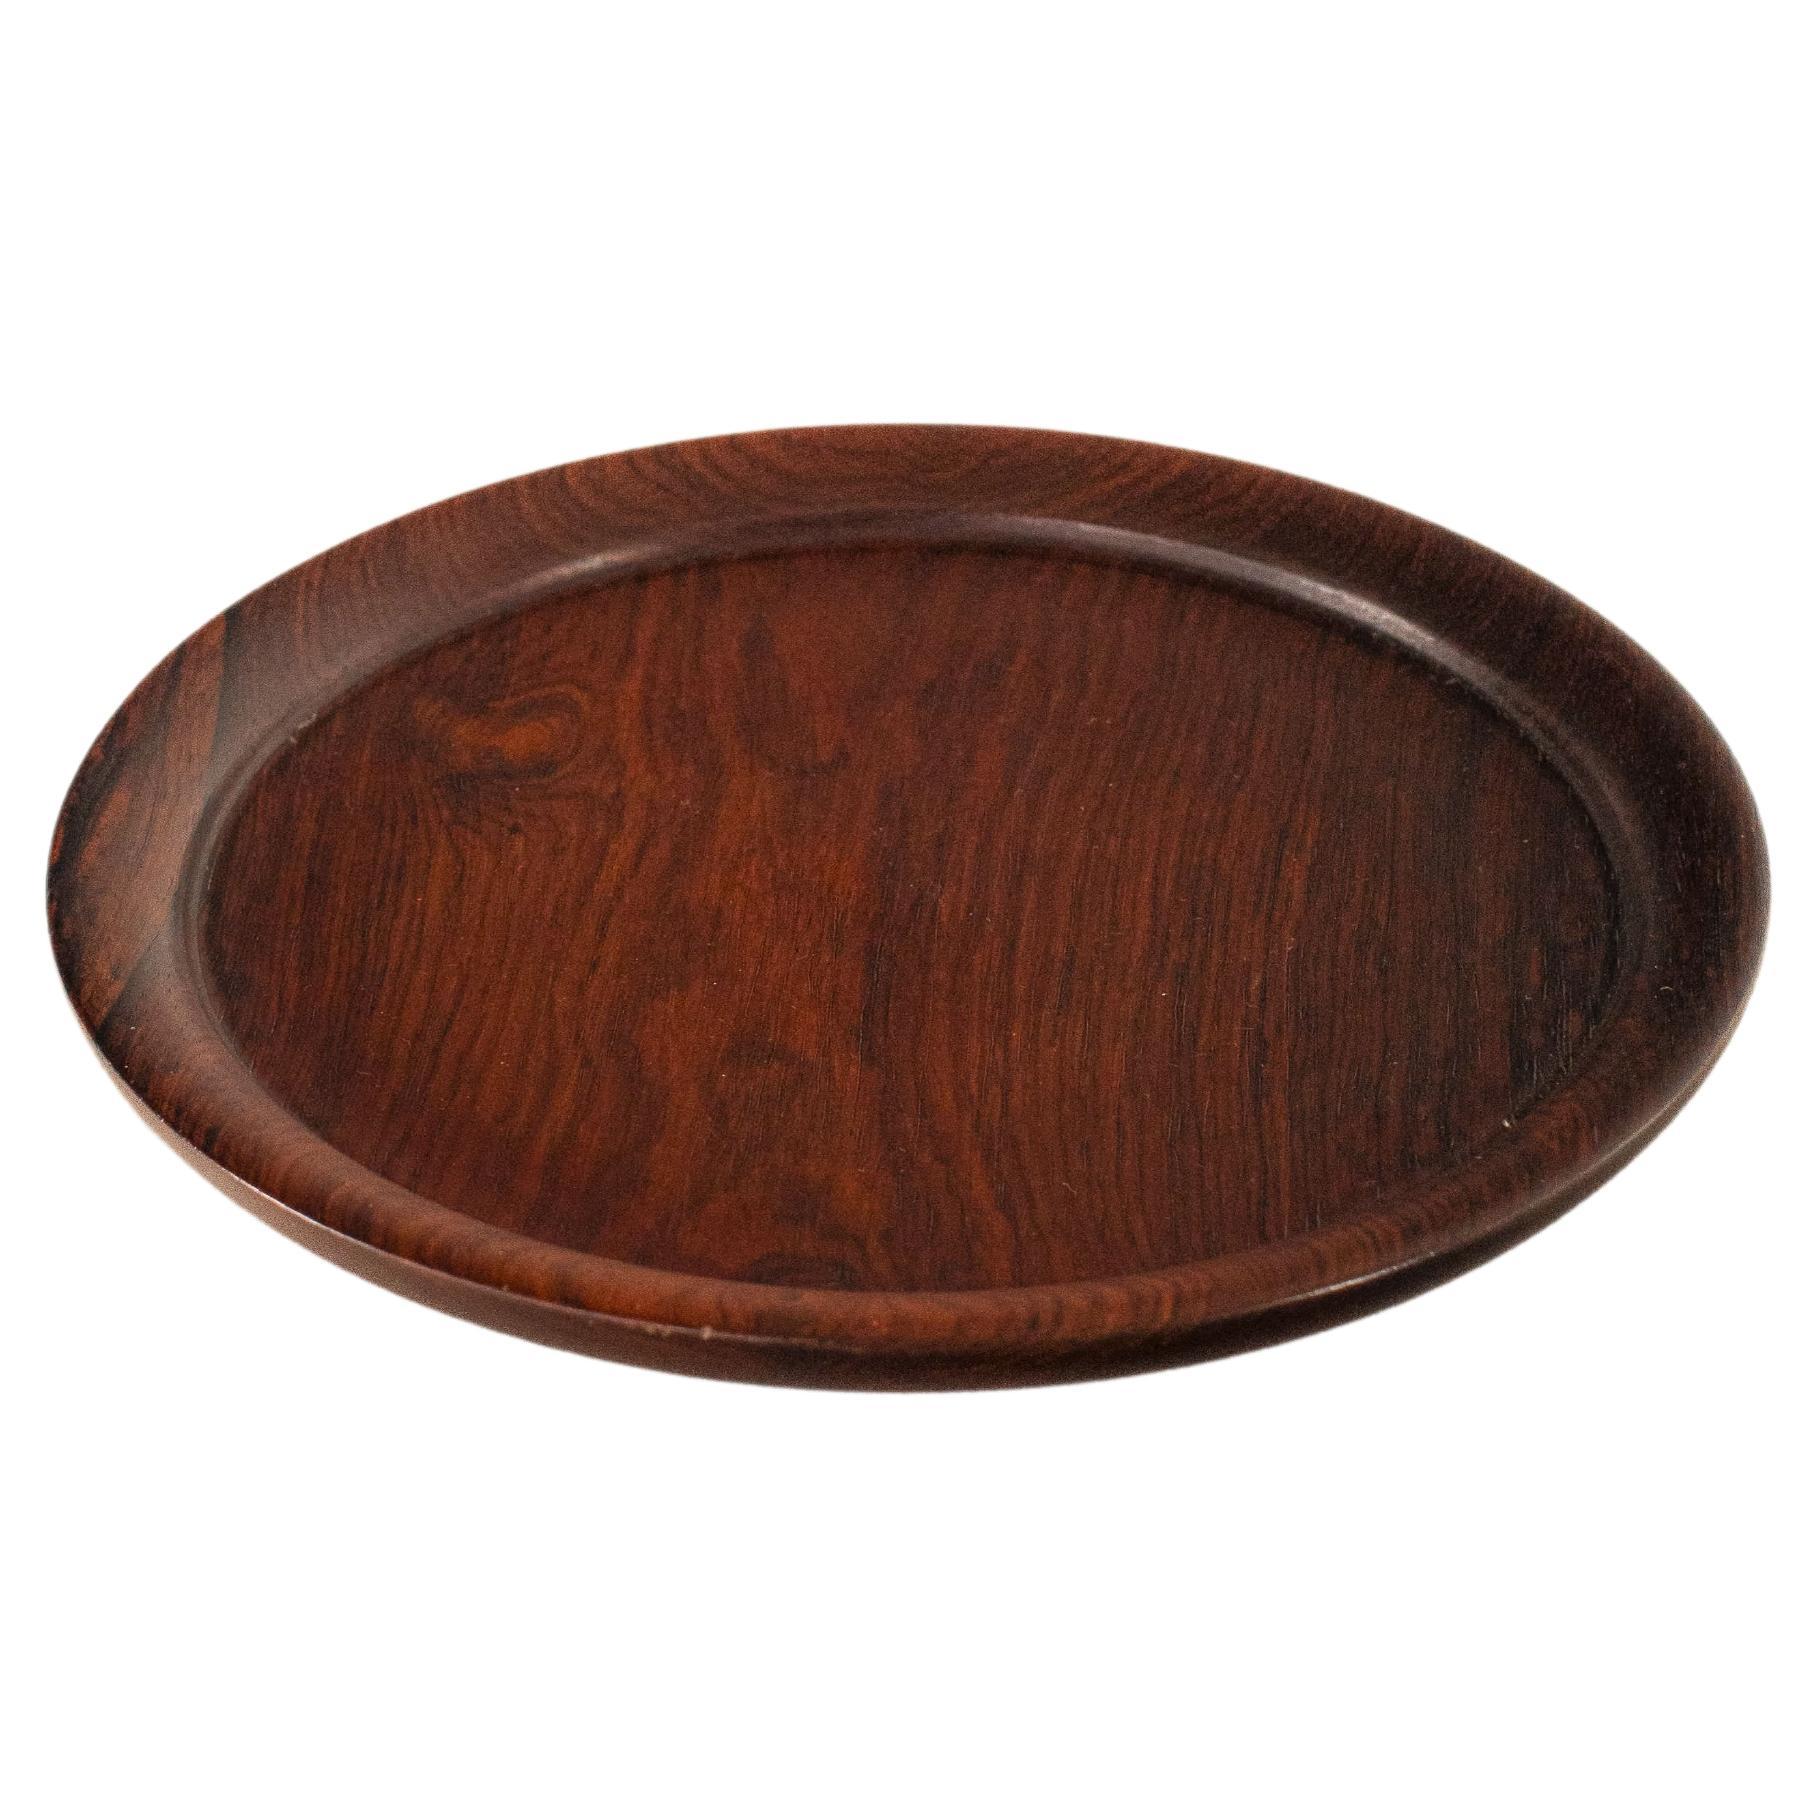 Brazilian Midcentury Serving Round Plate in Rosewood, c. 1970 For Sale